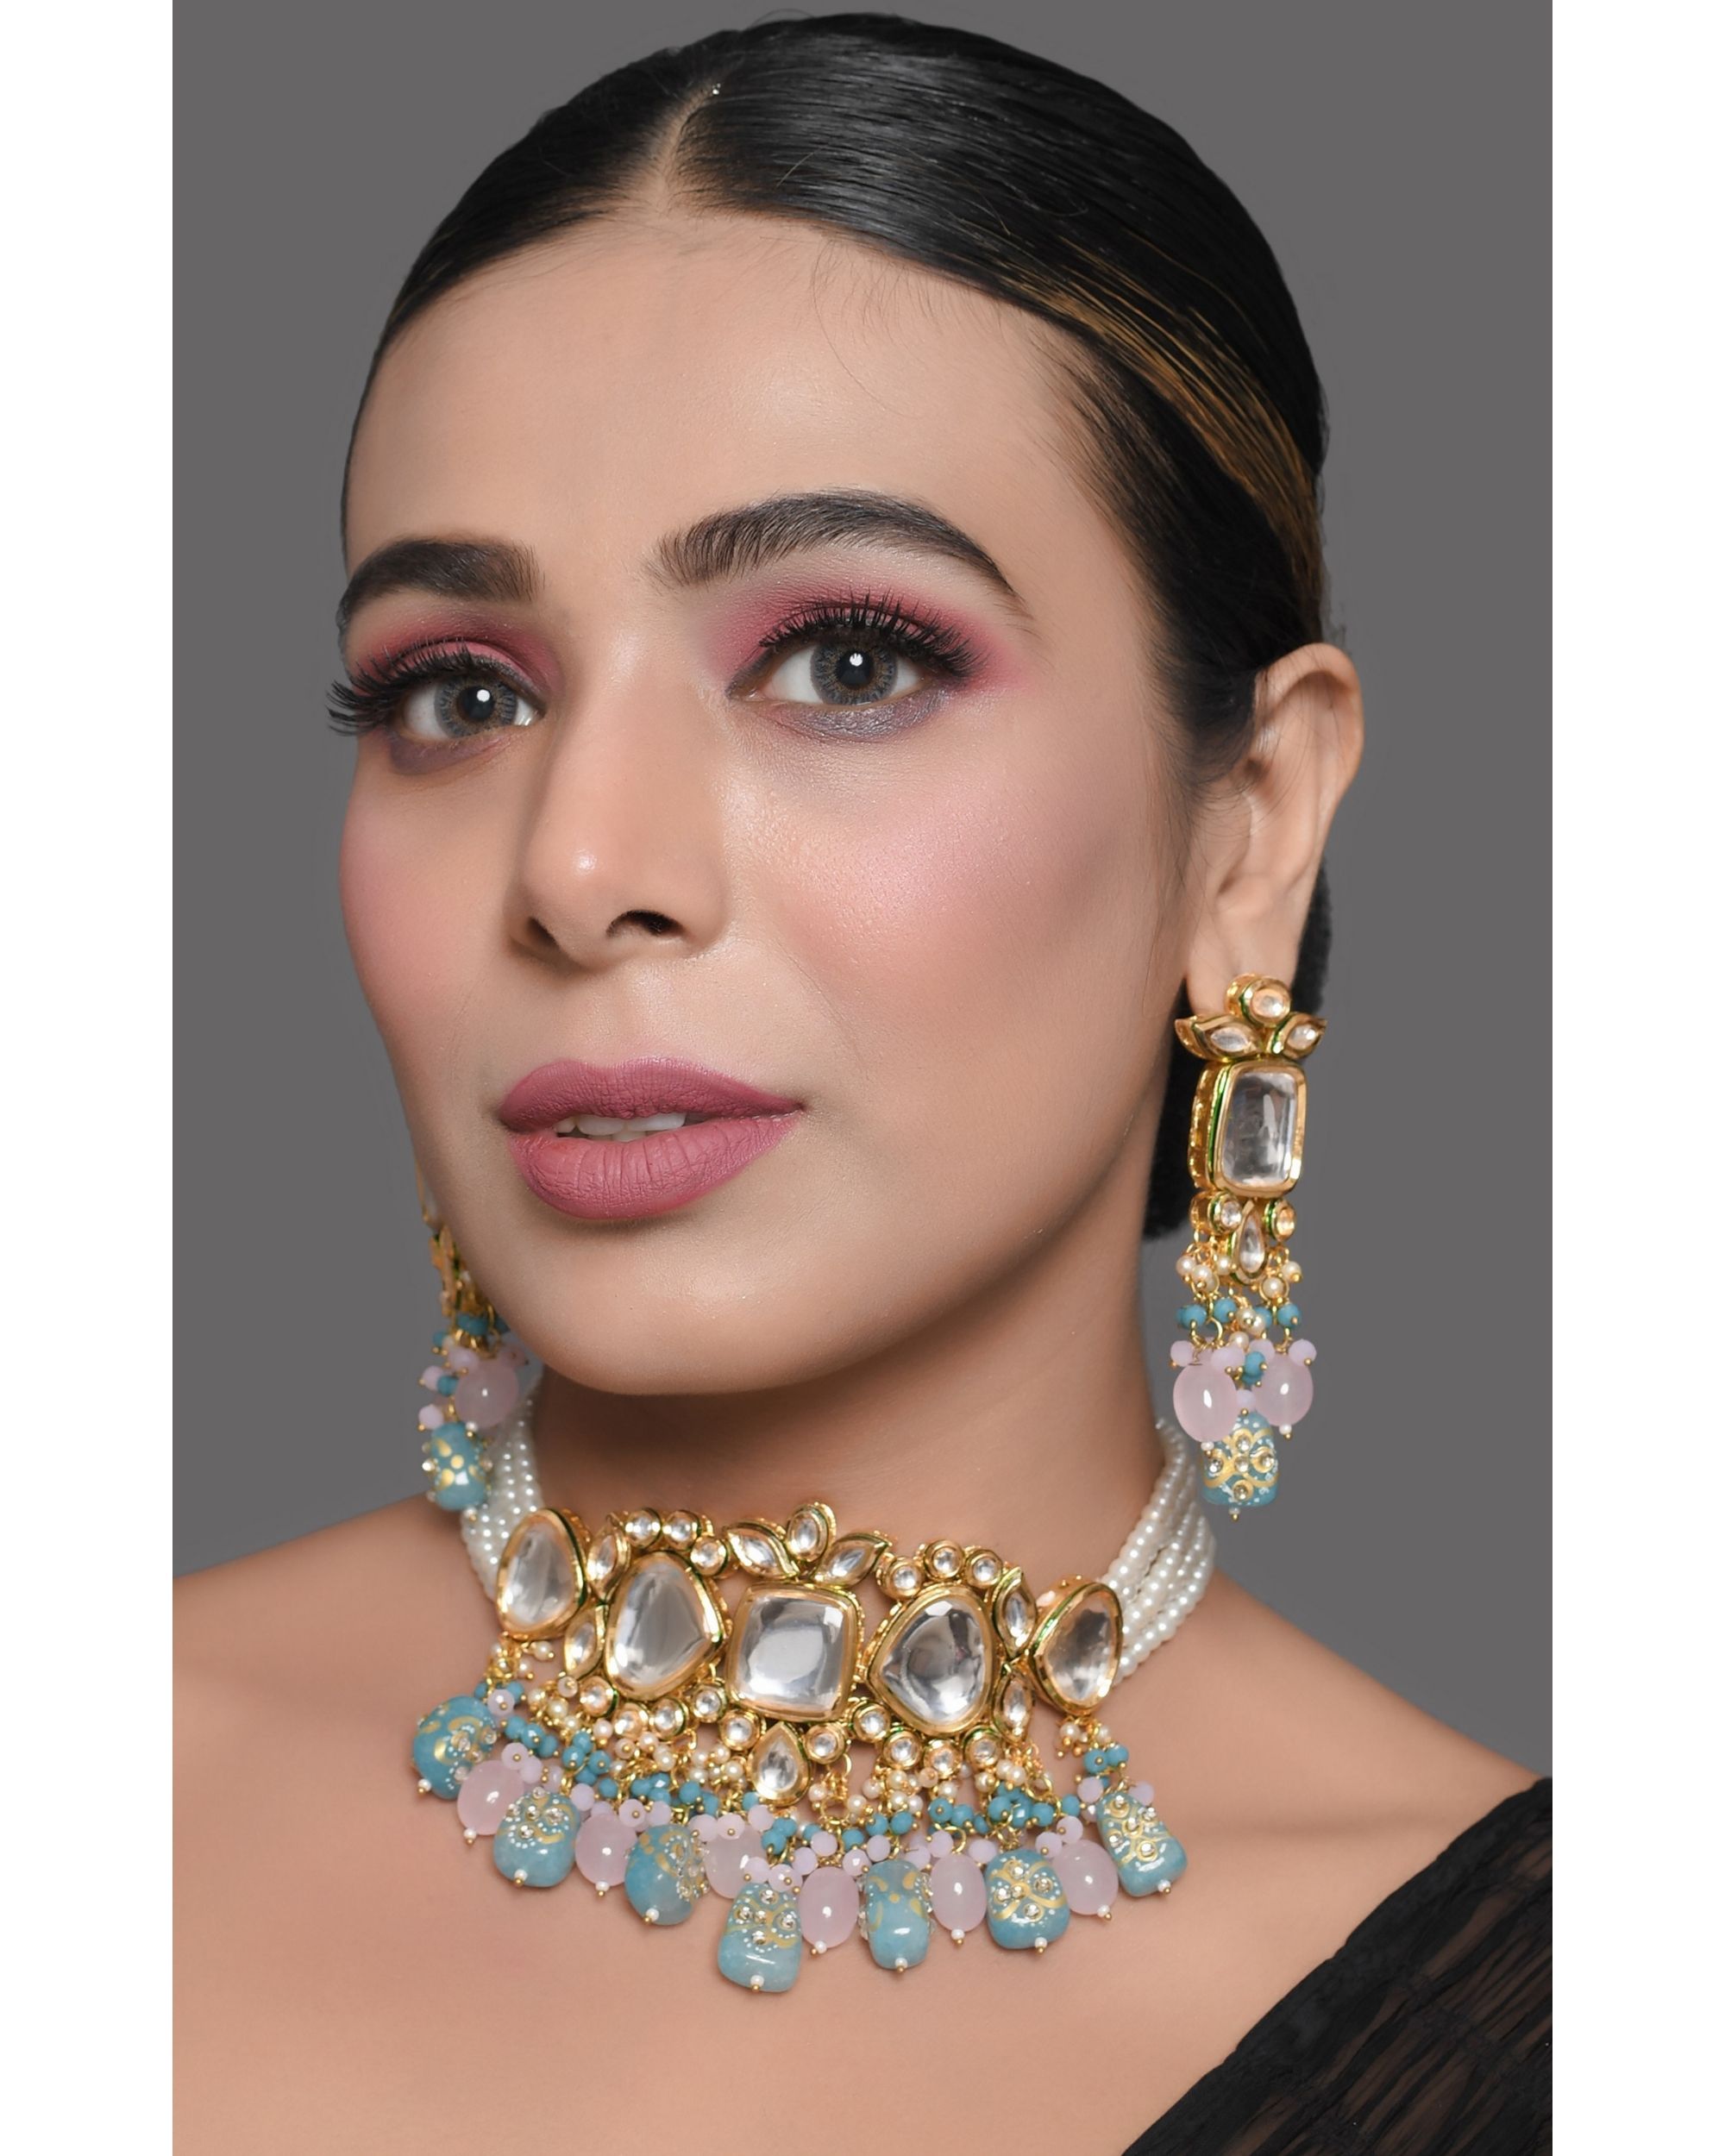 Pastel blue and pink tanjore beaded neckpiece with earrings - set of two